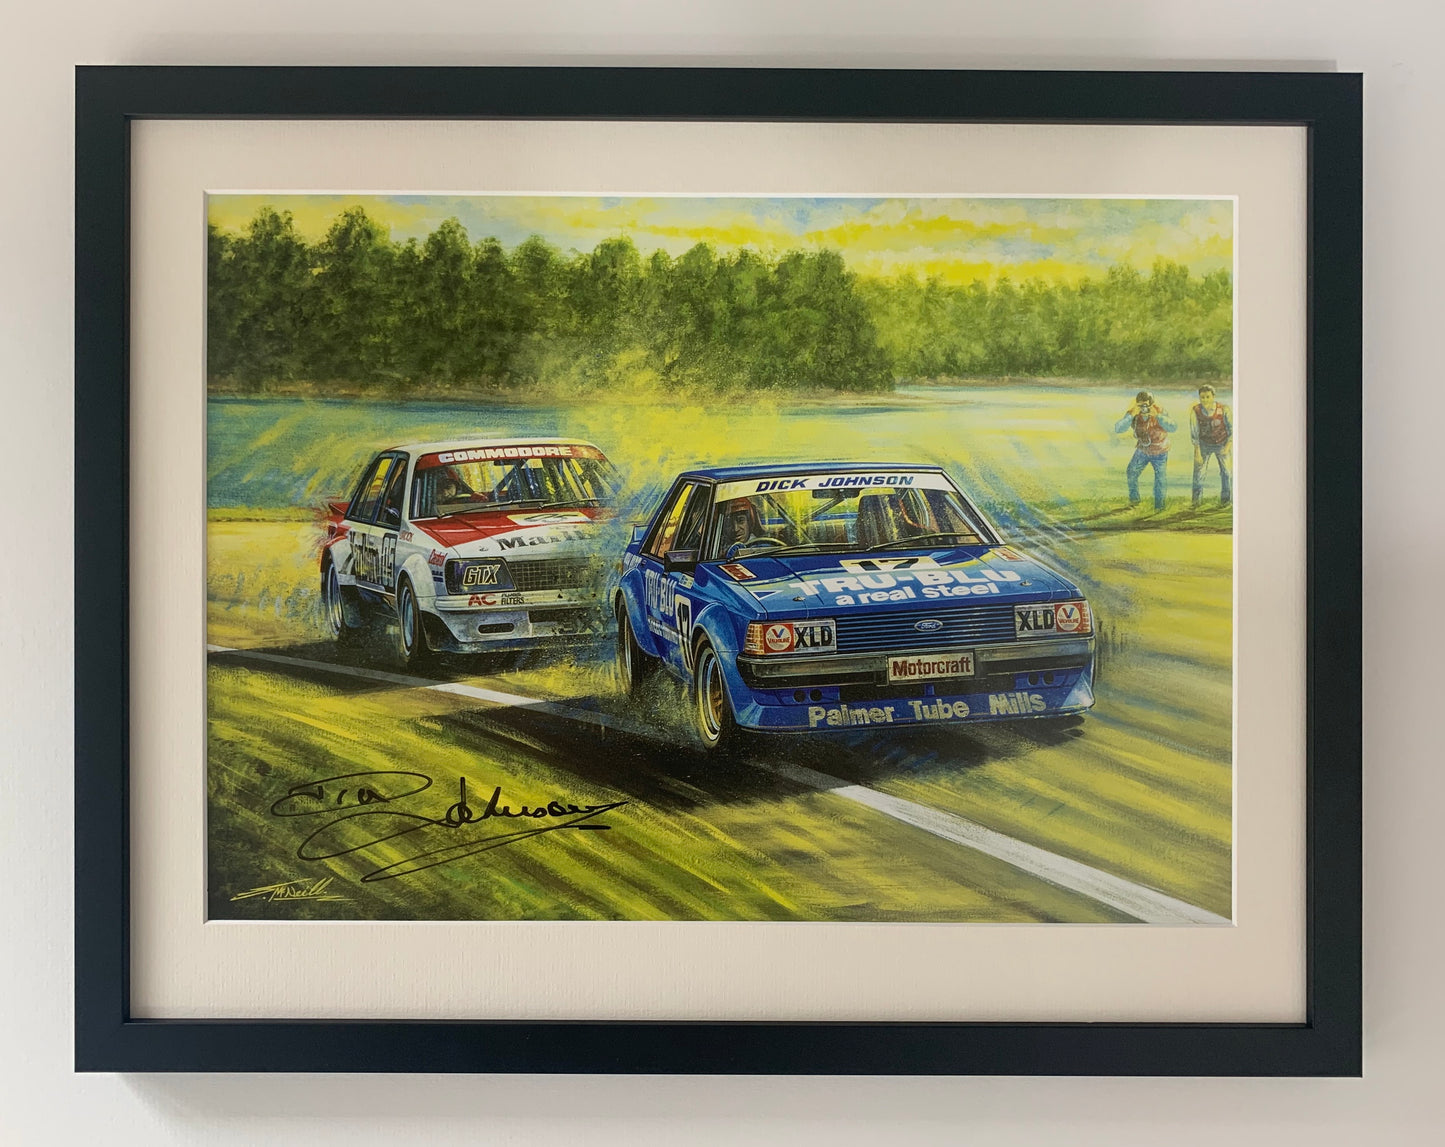 Johnson and Brock, Lakeside 1981 - signed by Dick Johnson